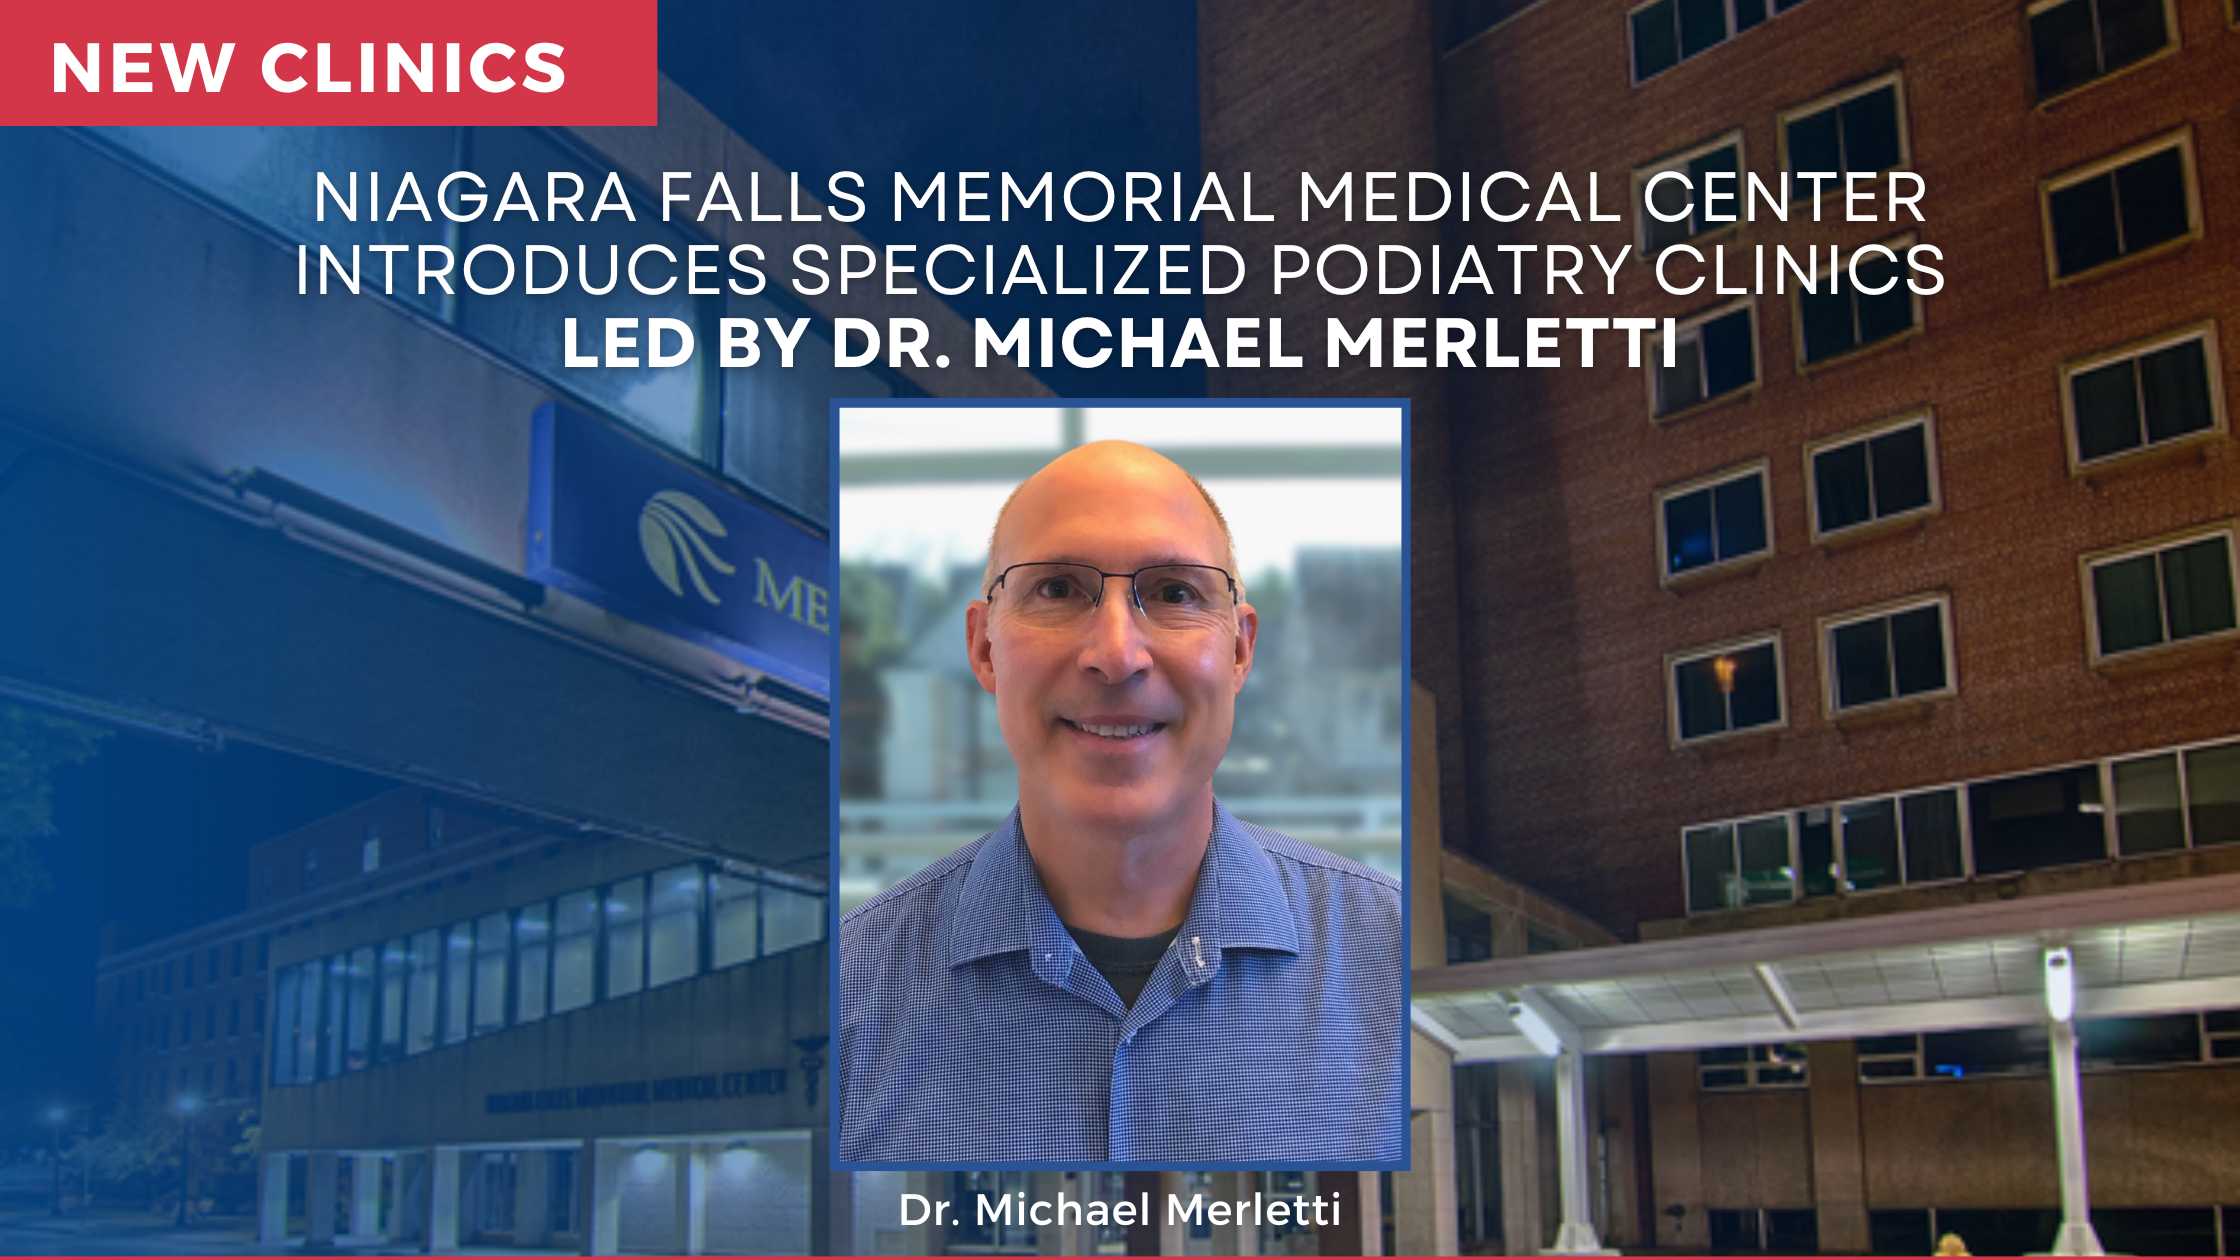 Niagara Falls Memorial Medical Center Introduces Specialized Podiatry Clinics Led by Dr. Michael Merletti